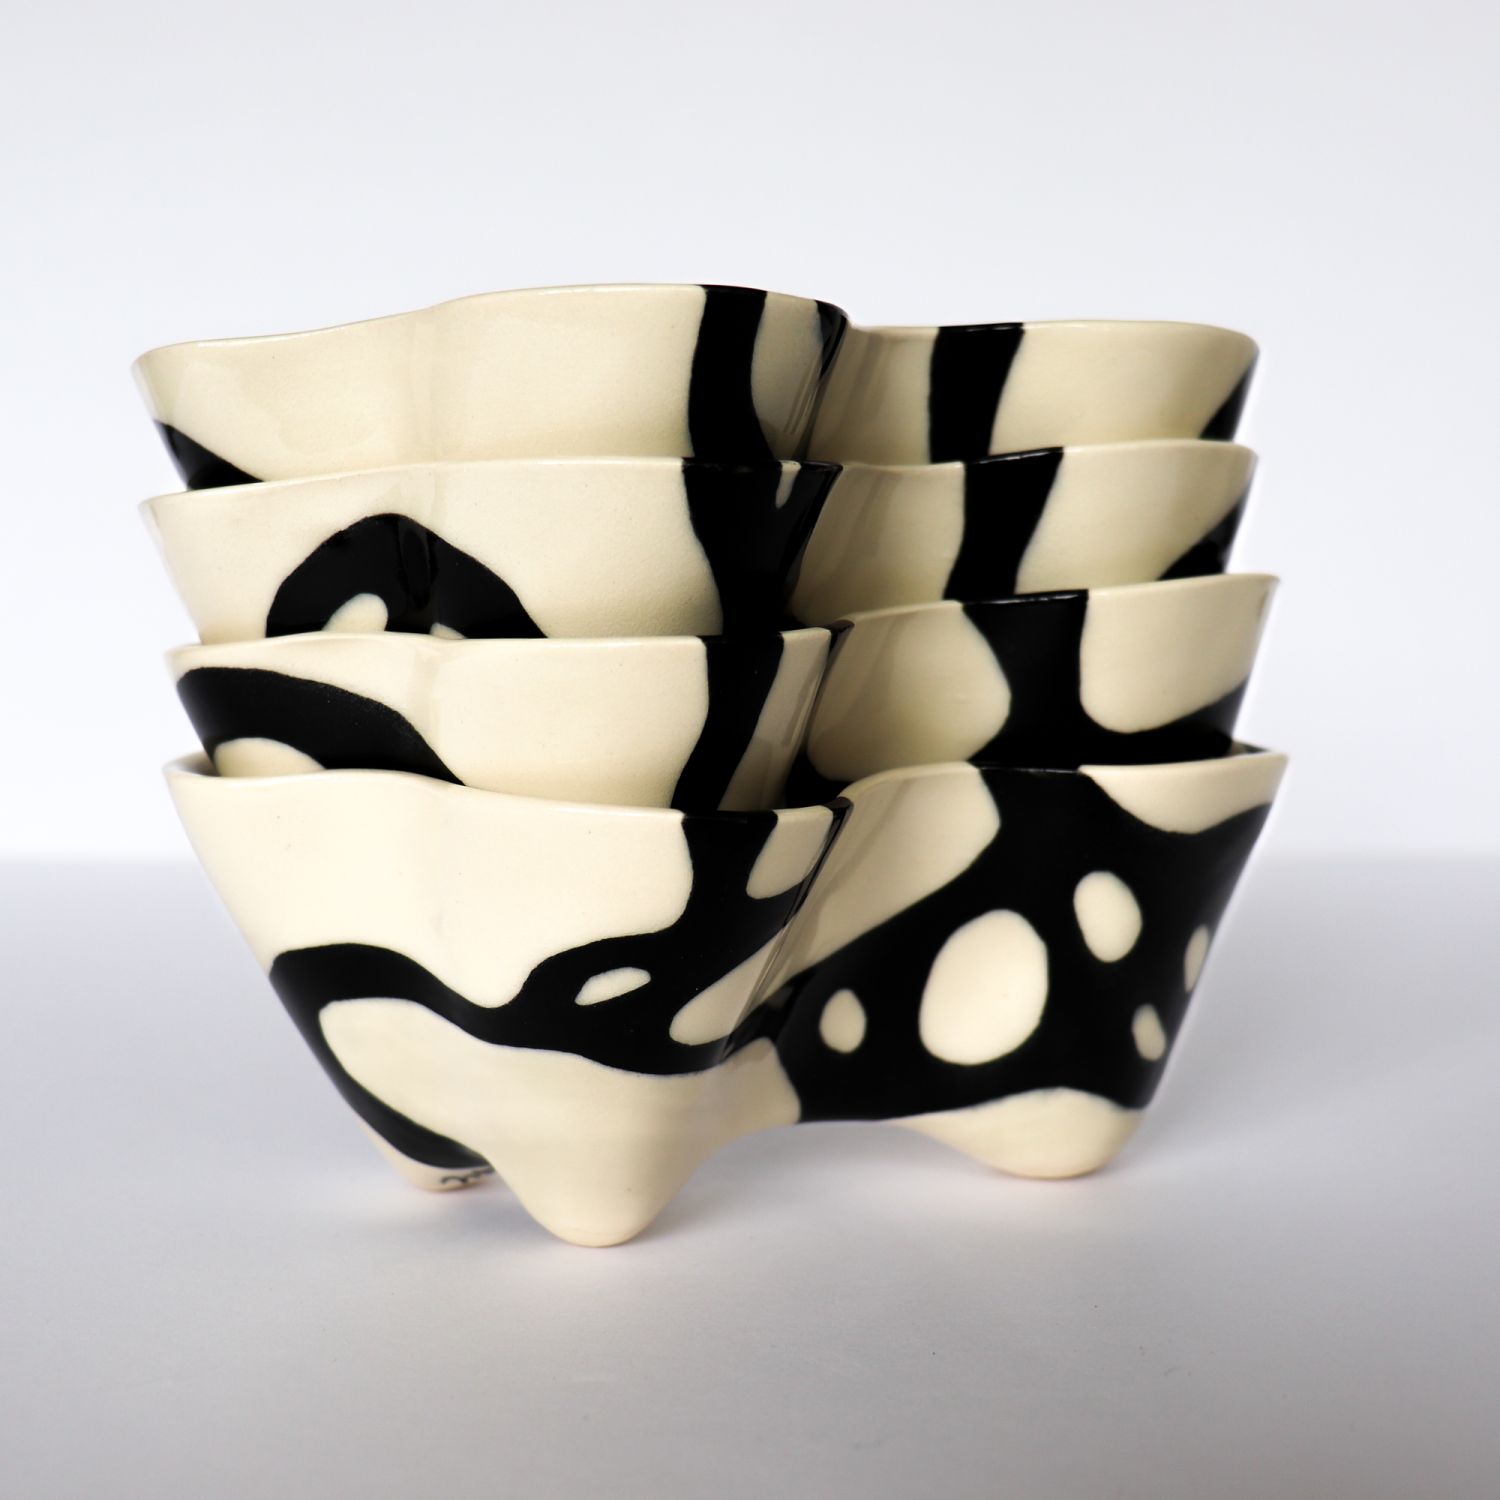 Alana Marcoccia: Interconnected Sculptural Bowl Product Image 2 of 13